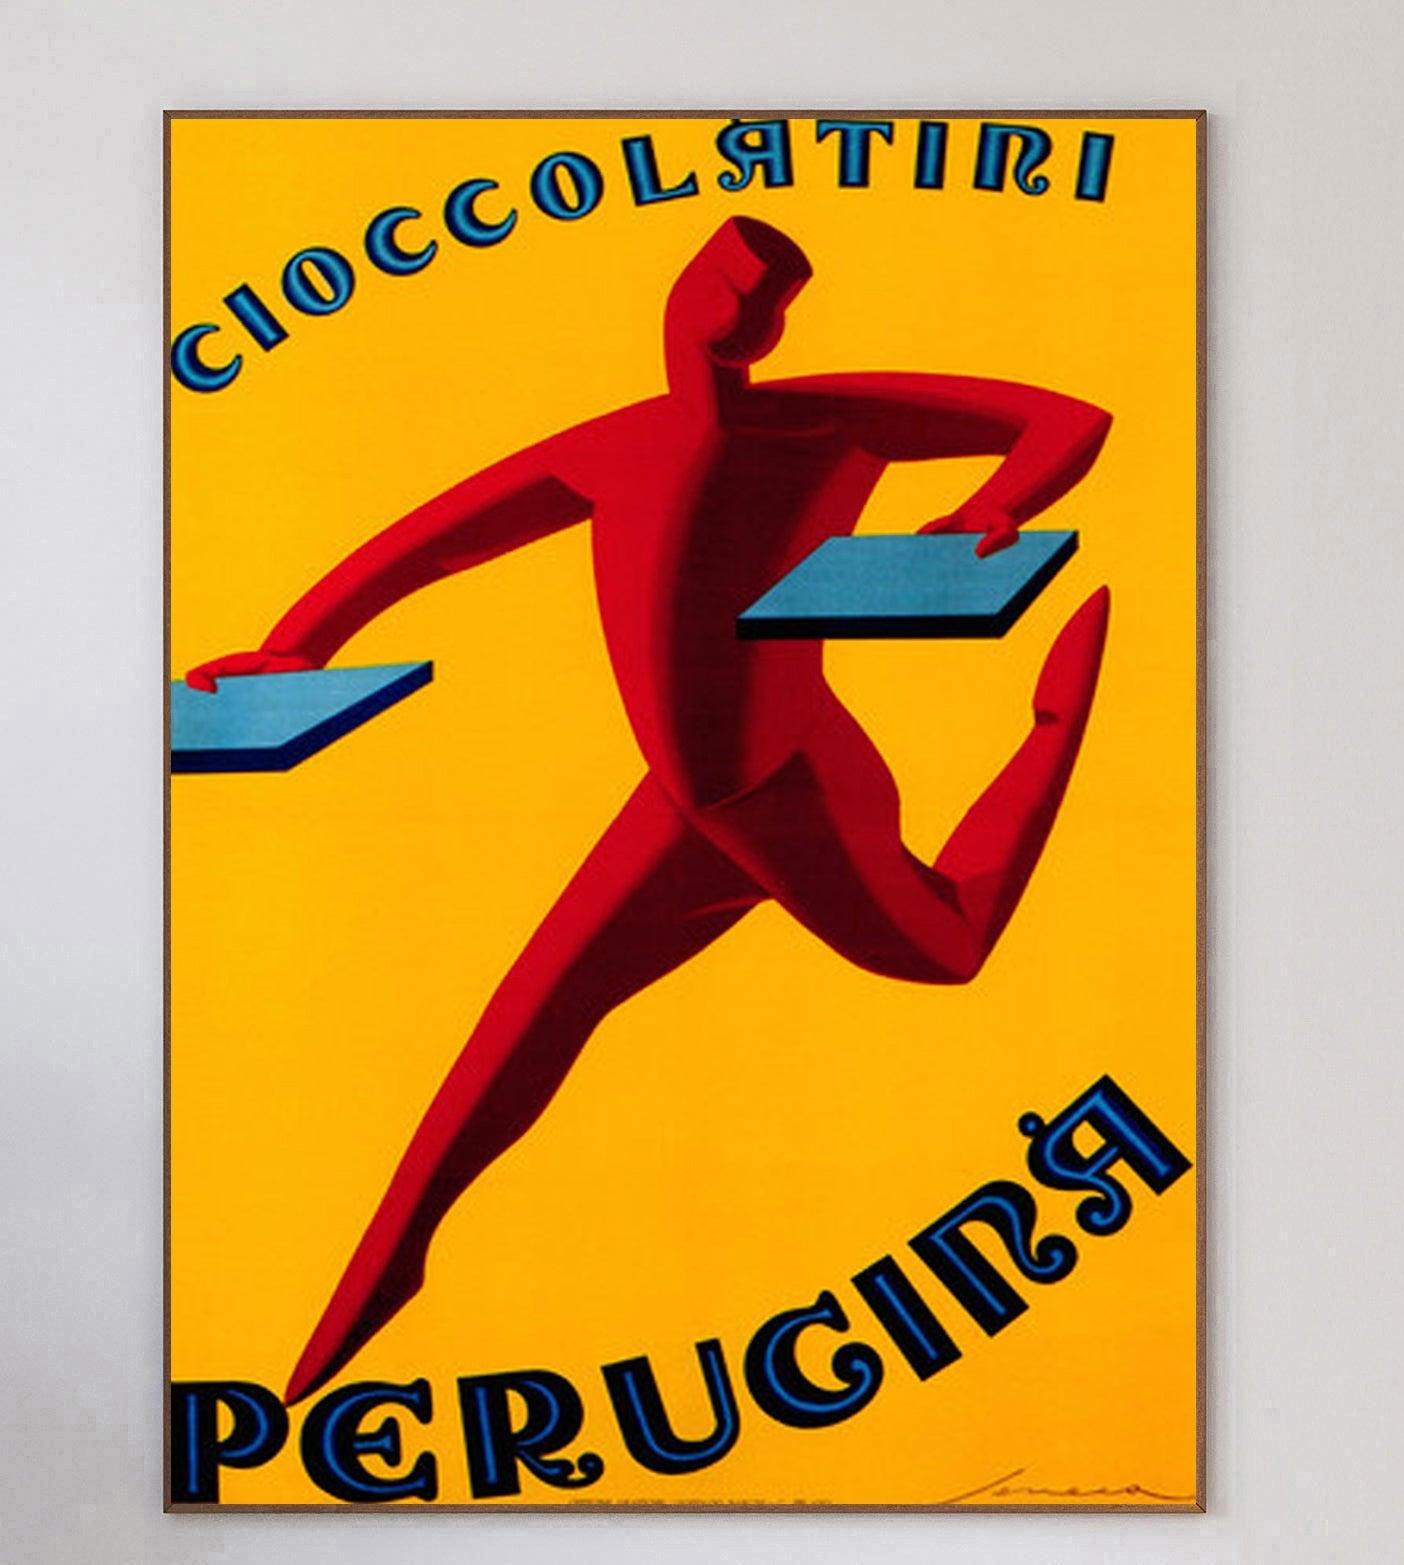 Founded in 1907 and named after the town in which it is based, Perugina is an Italian chocolate and confectionary company that continues to trade to this day.

This beautiful art deco design depicting a running figure, and reading 